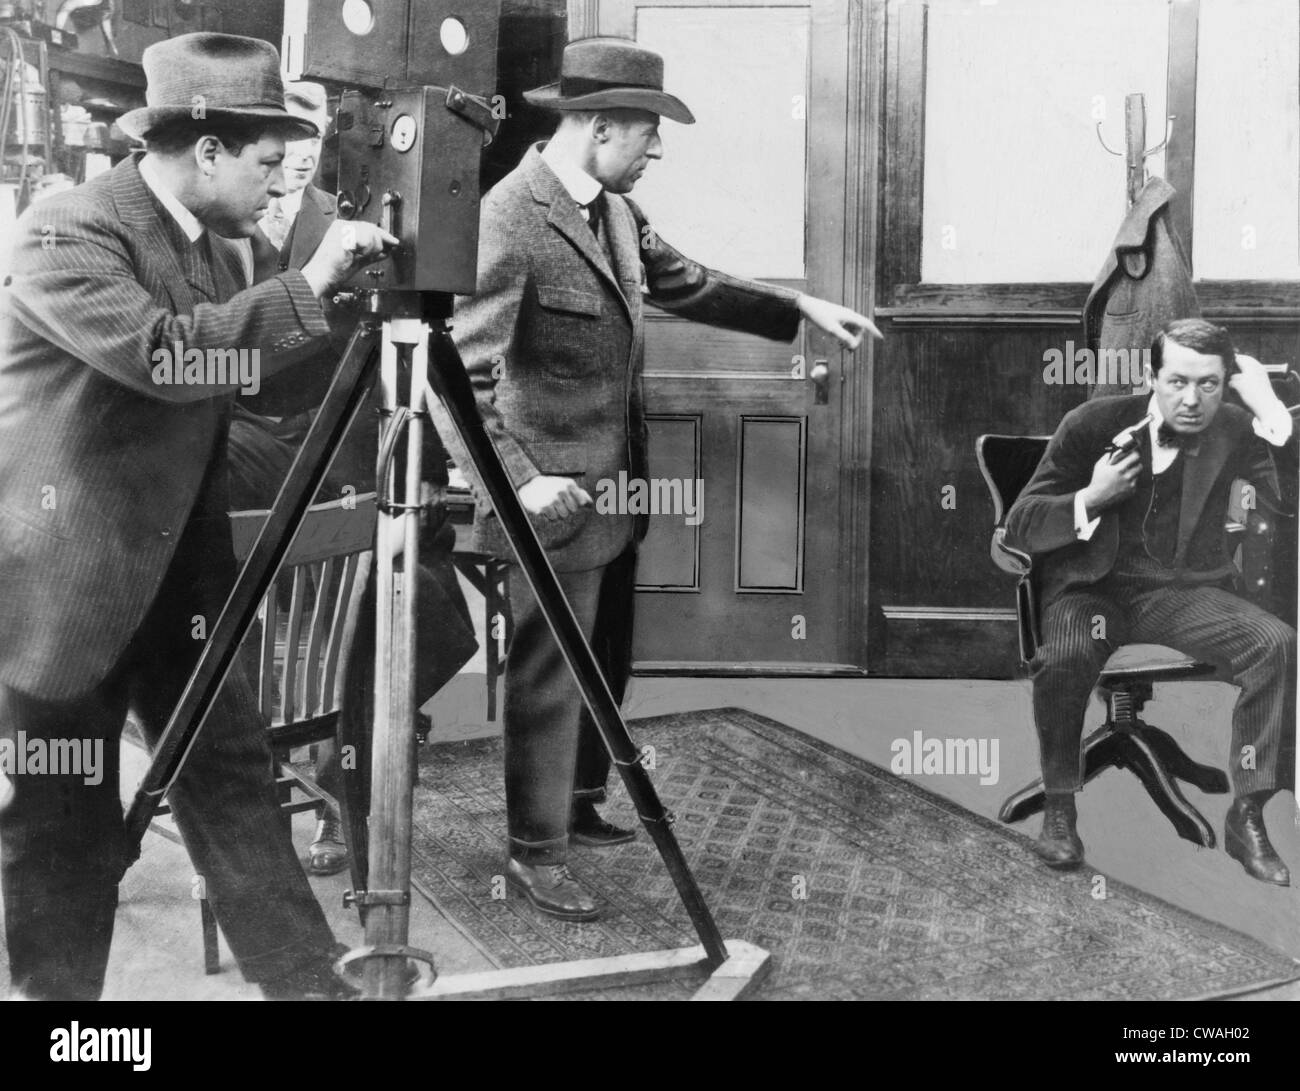 D.W. Griffith (1875-1948) directing Henry B. Walthall in 1914 film THE AVENGING CONSCIENCE with Billy Bitzer at the camera. Stock Photo